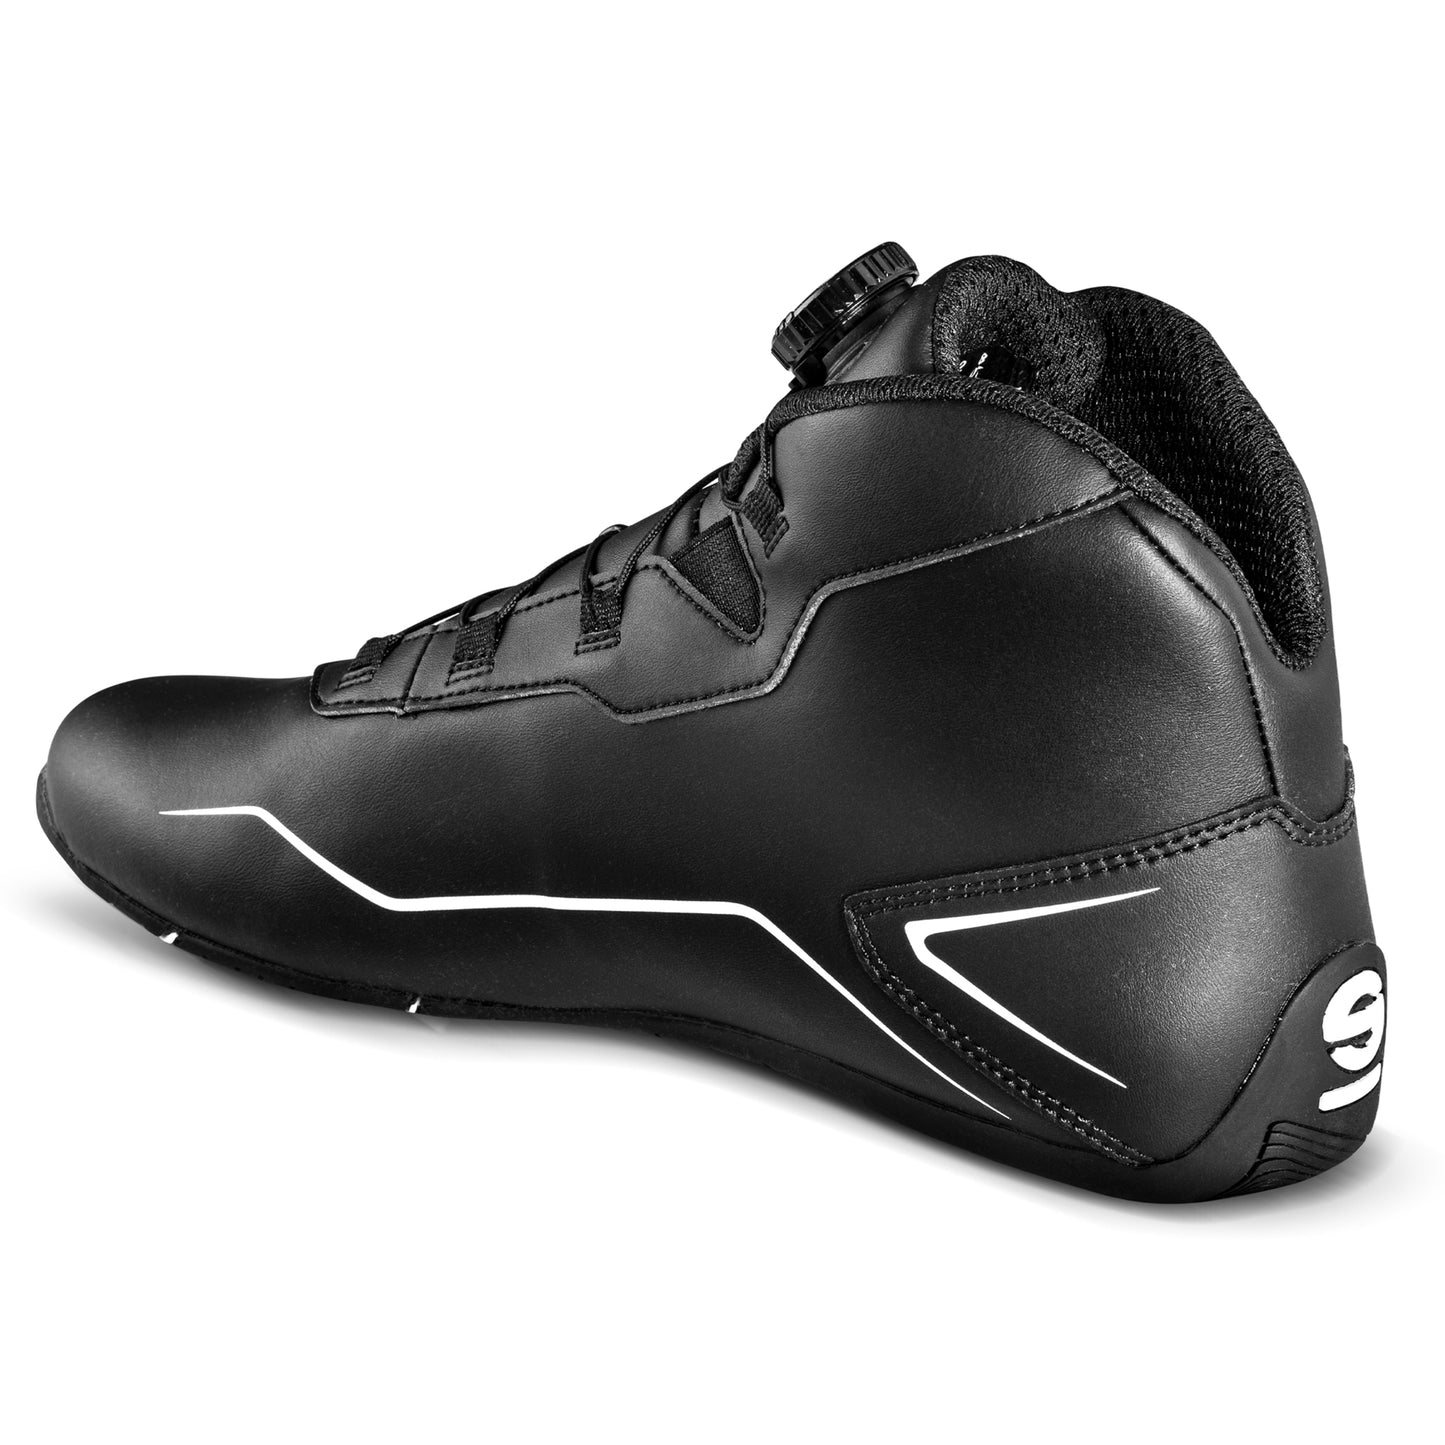 Sparco K-Pole WP Karting Shoes